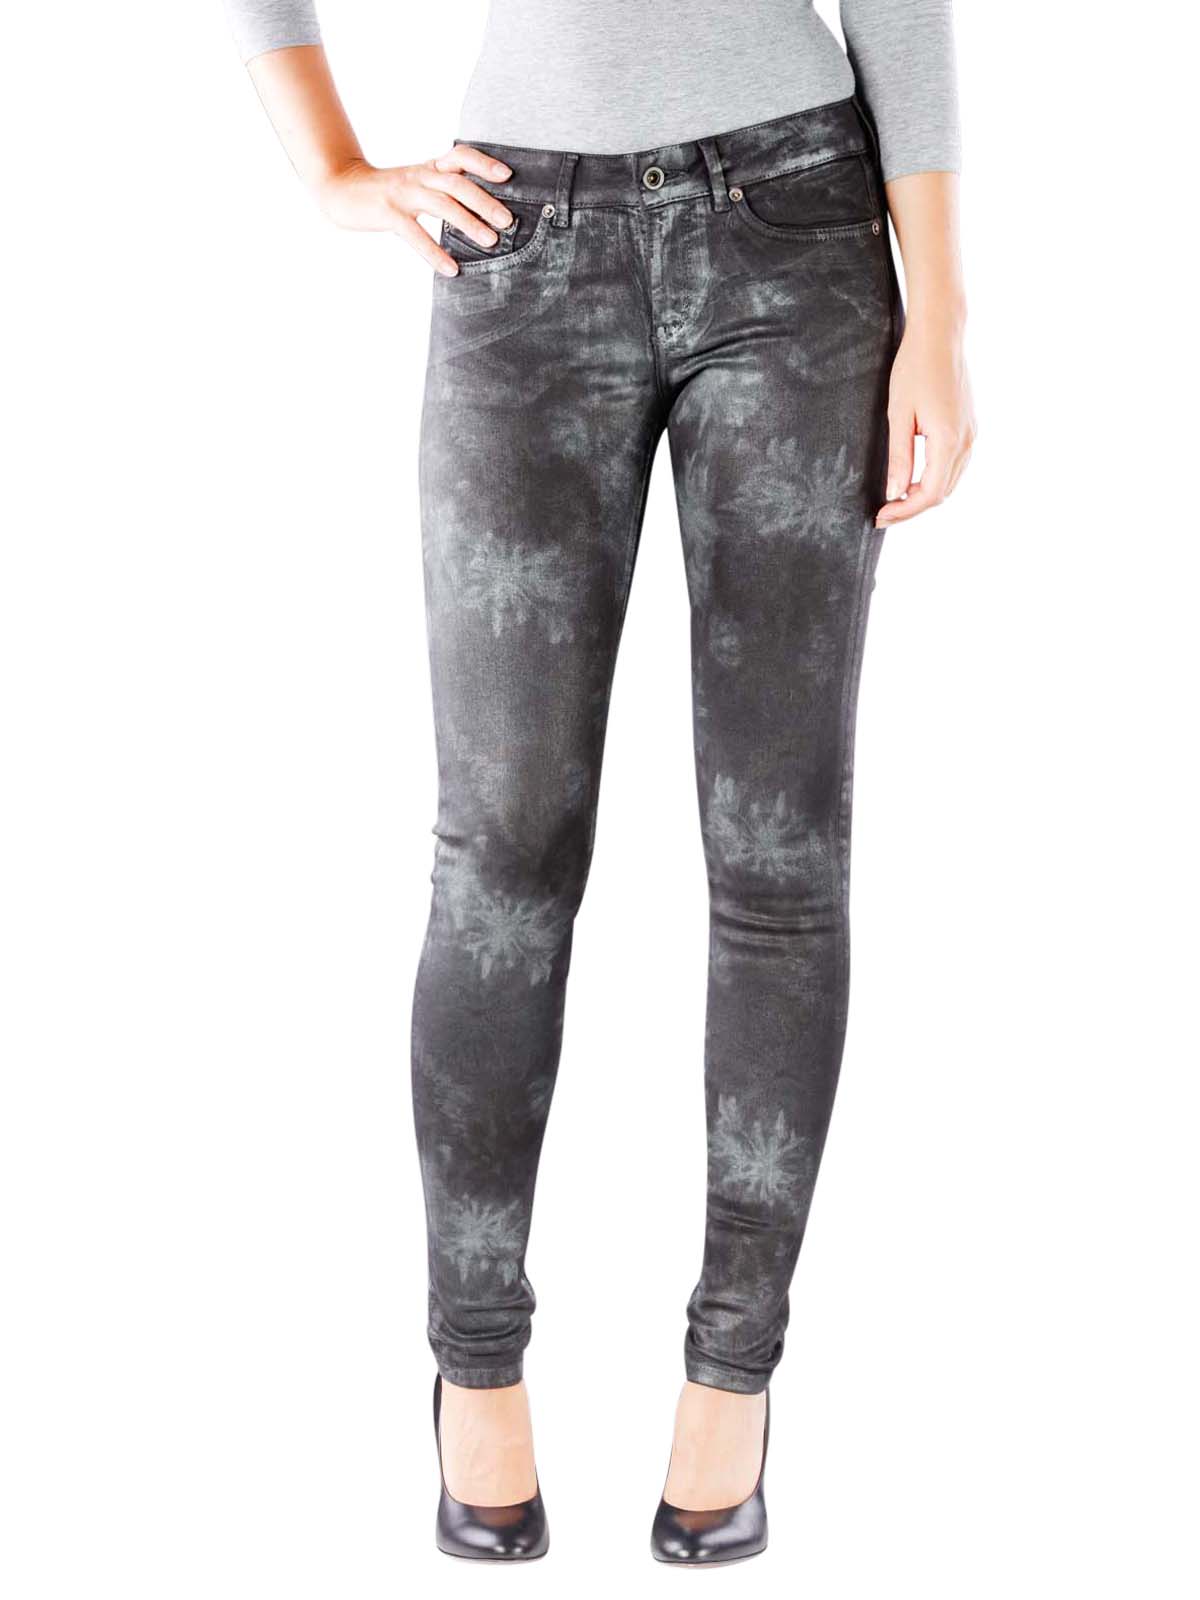 Kindercentrum Verdorie regiment Pepe Jeans Pixie Skinny Silvermoon silver foiled black Pepe Jeans Women's  Jeans | Free Shipping on BEBASIC.CH - SIMPLY LOOK GOOD